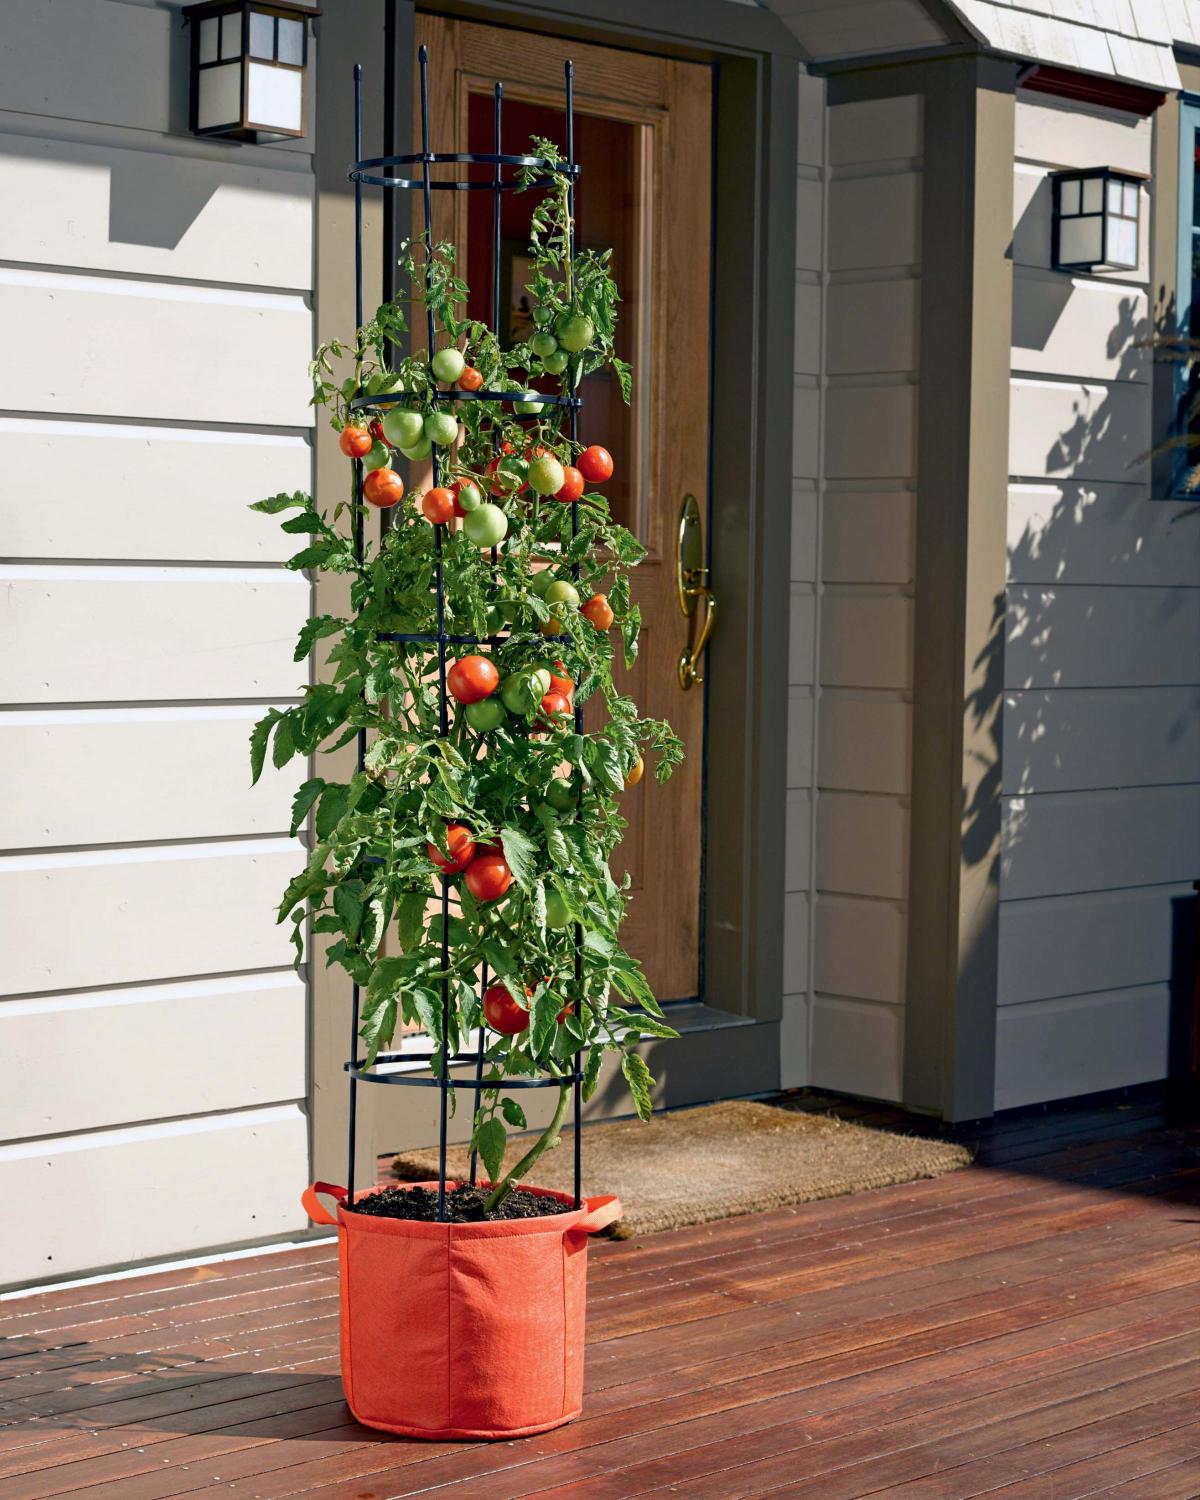 6 imaginative ways to use grow bags in small spaces